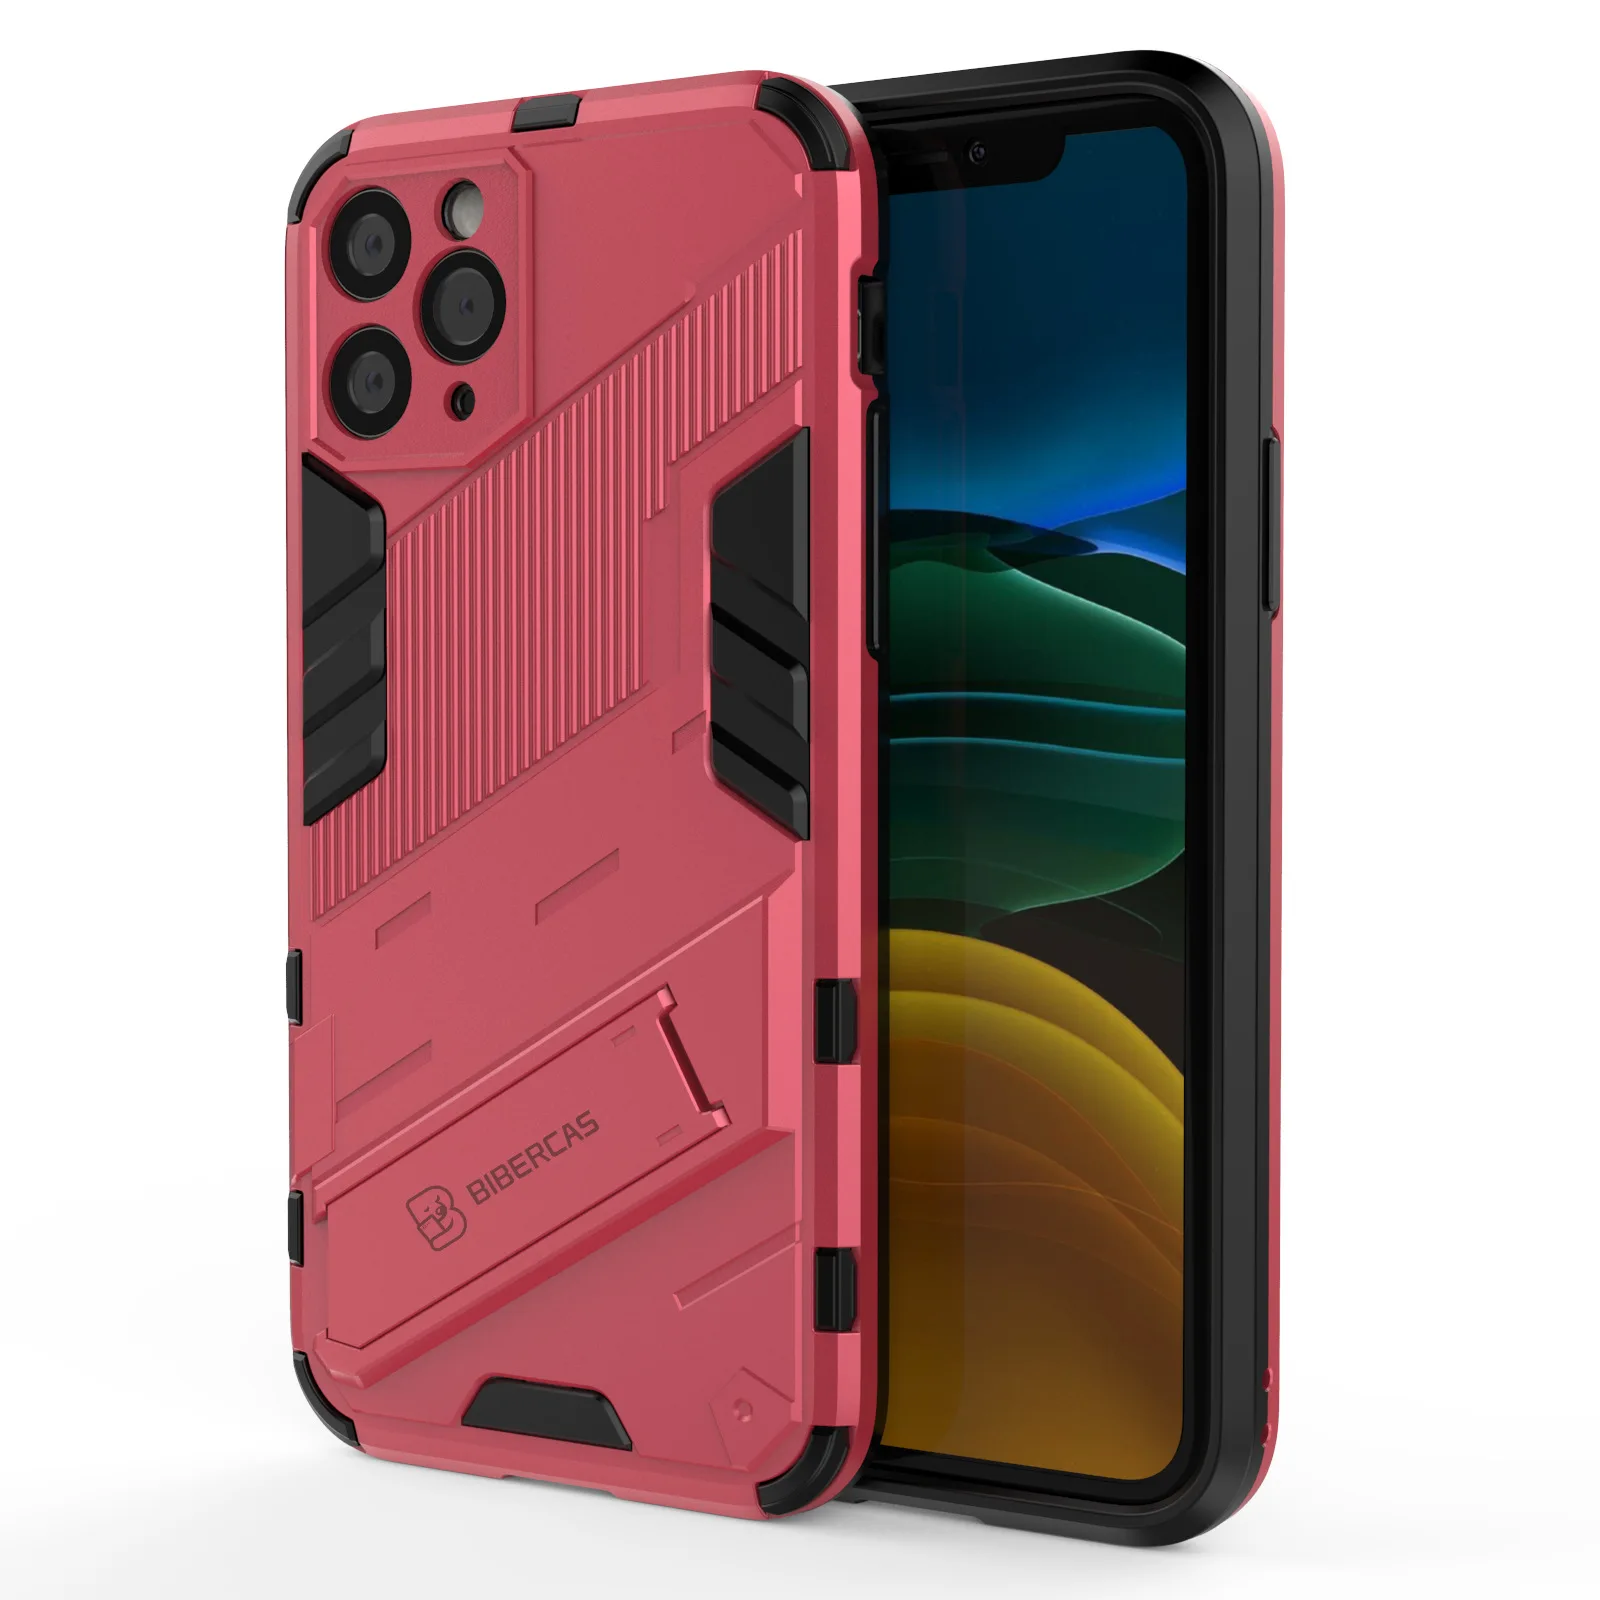 20Pcs/For iPhone 11 Pro Max Case Punk Stlye Hard Rubber Armor Bracket Cover For 11Pro Max 11 Case Hull Cover With Holder